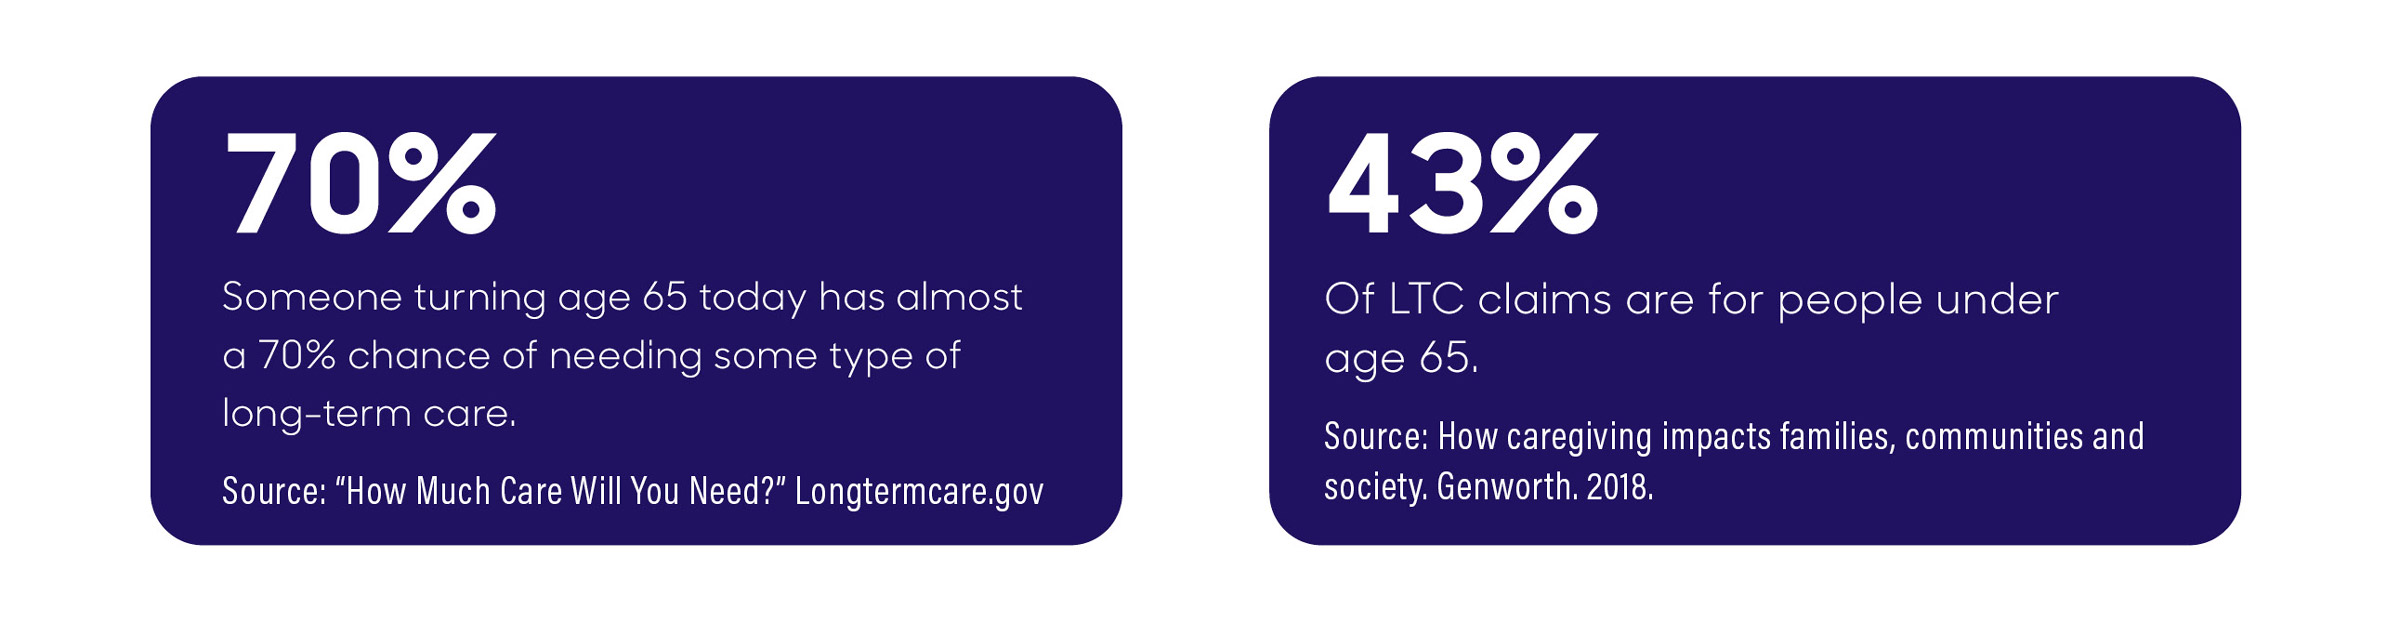 70 percent - someone turning age 65 today has almost a 70% chance of needing some type of long-term care. 43% of LTC care claims are for people under age 65.